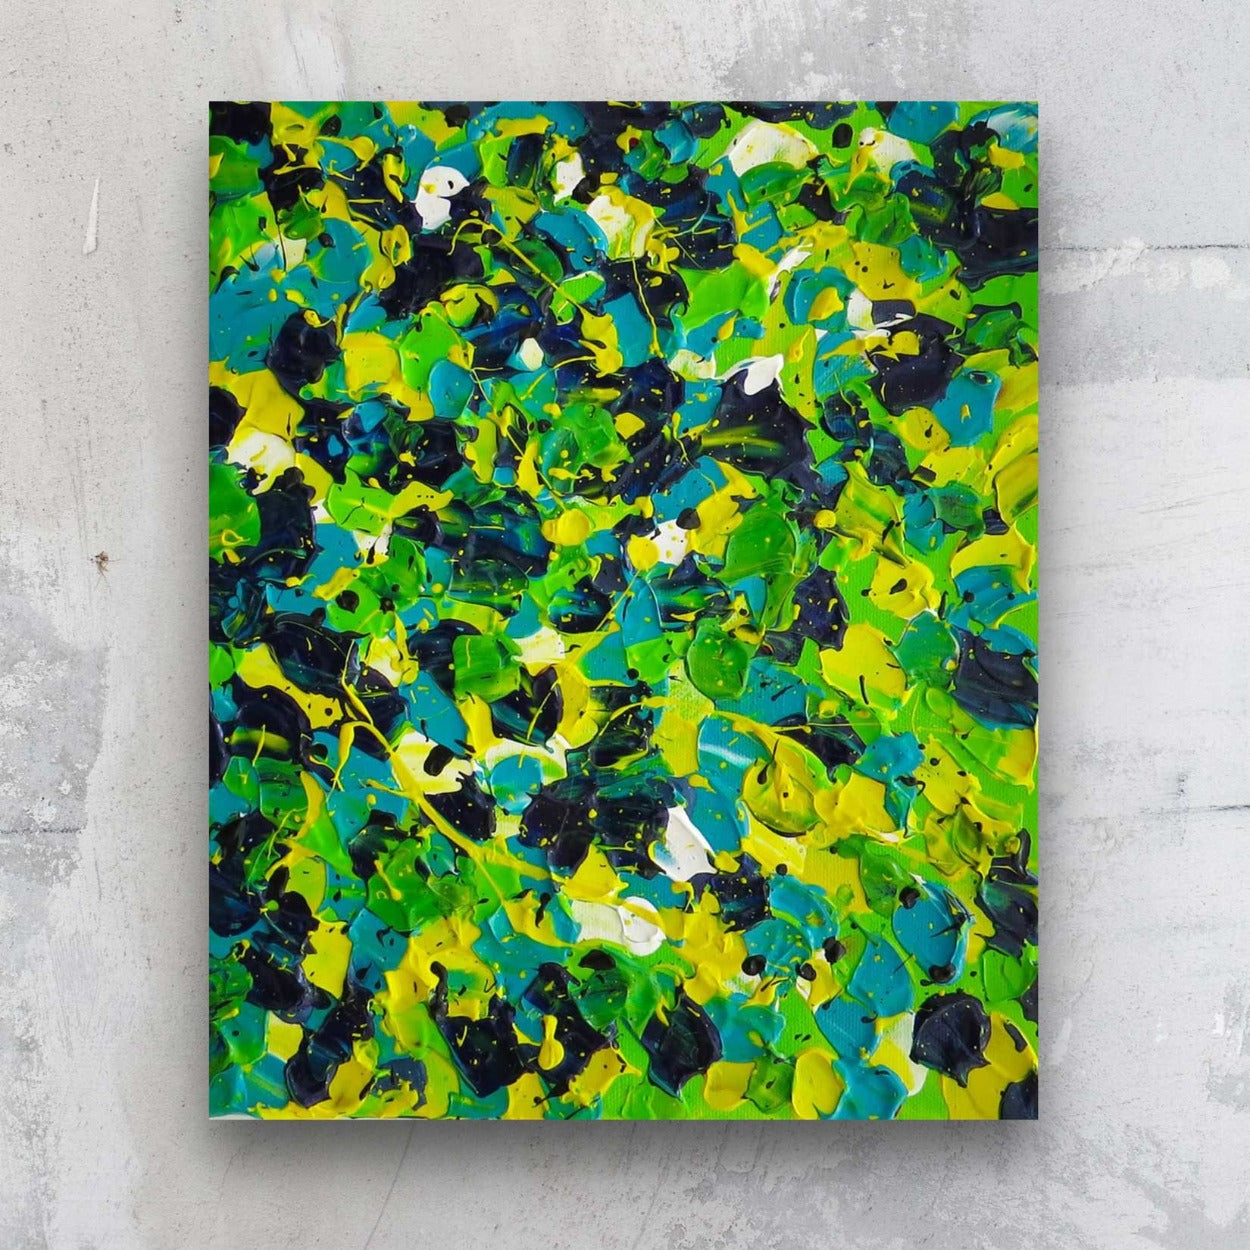 Avocado Smash original heavily textured painting on canvas in vibrant greens. Painted by Bridget Bradley